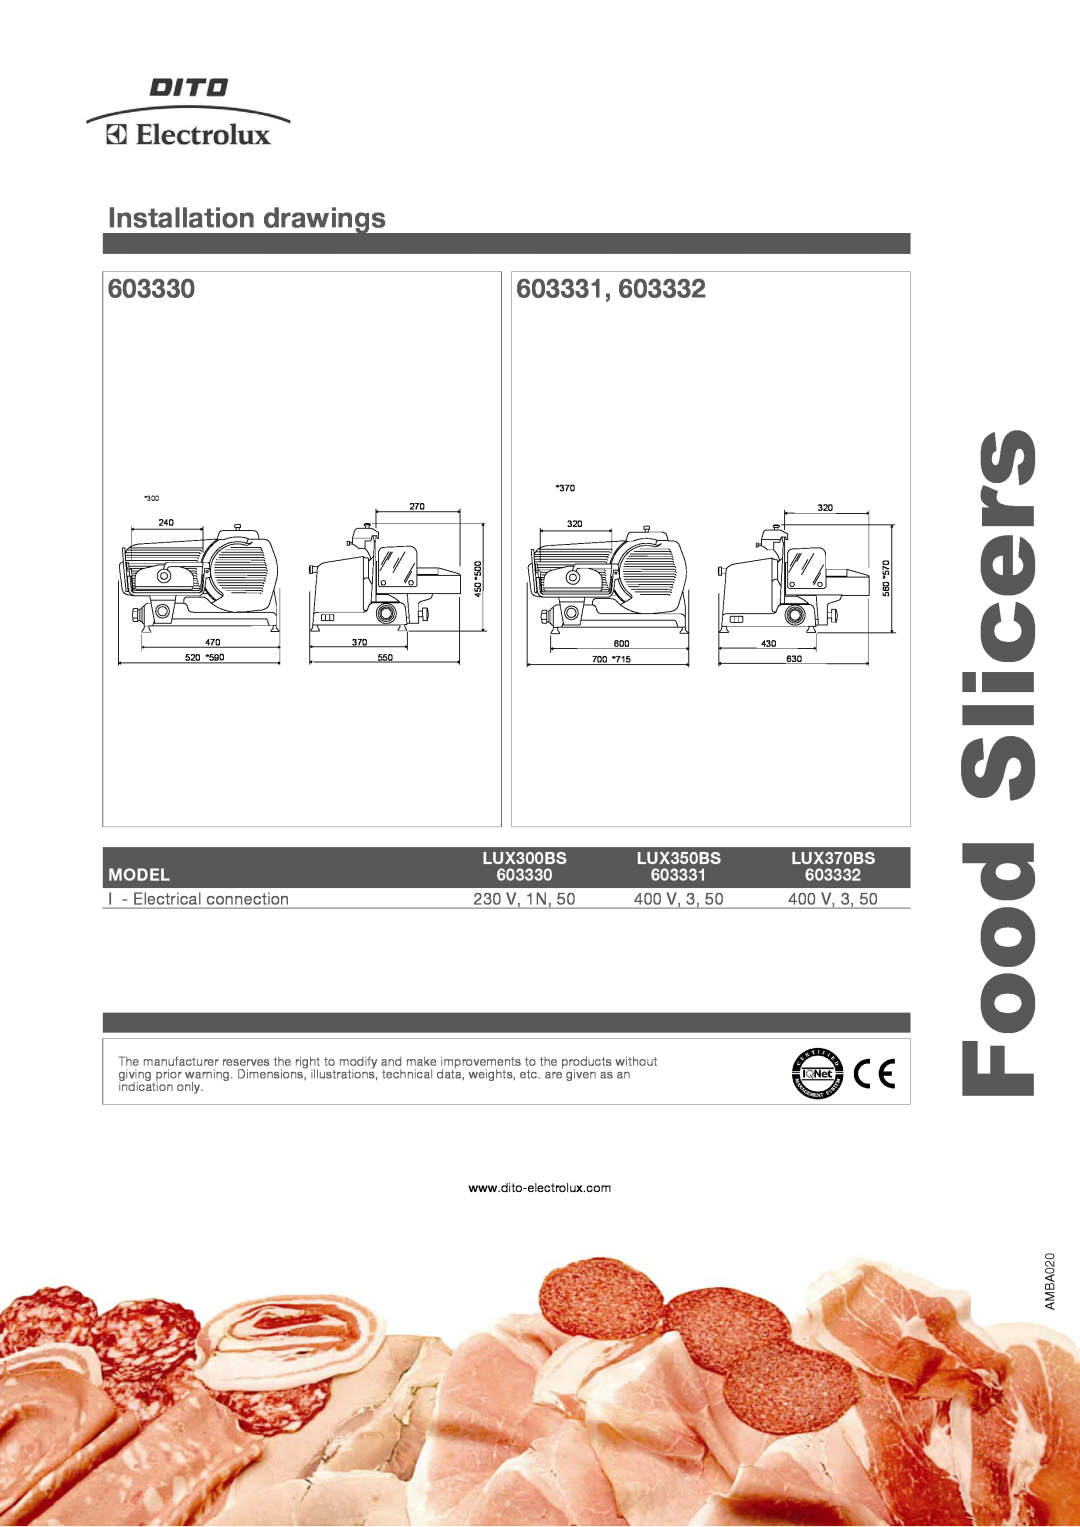 Electrolux LUX350BS, LUX370BS, LUX300BS manual Installation drawings, 603331, Slicers, 603330, Model 